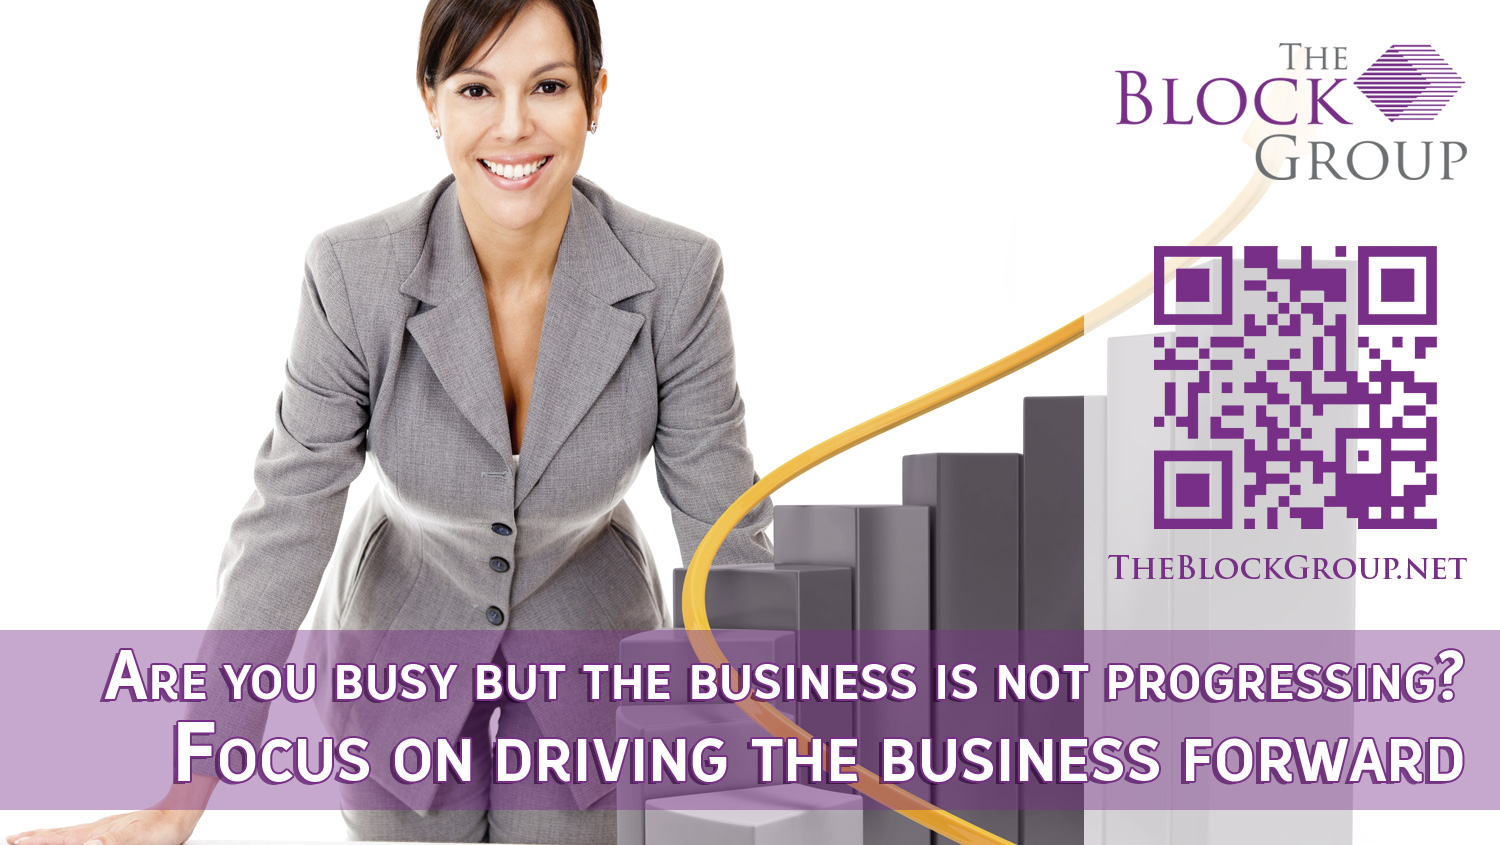 026-Focus-on-driving-the-business-forward